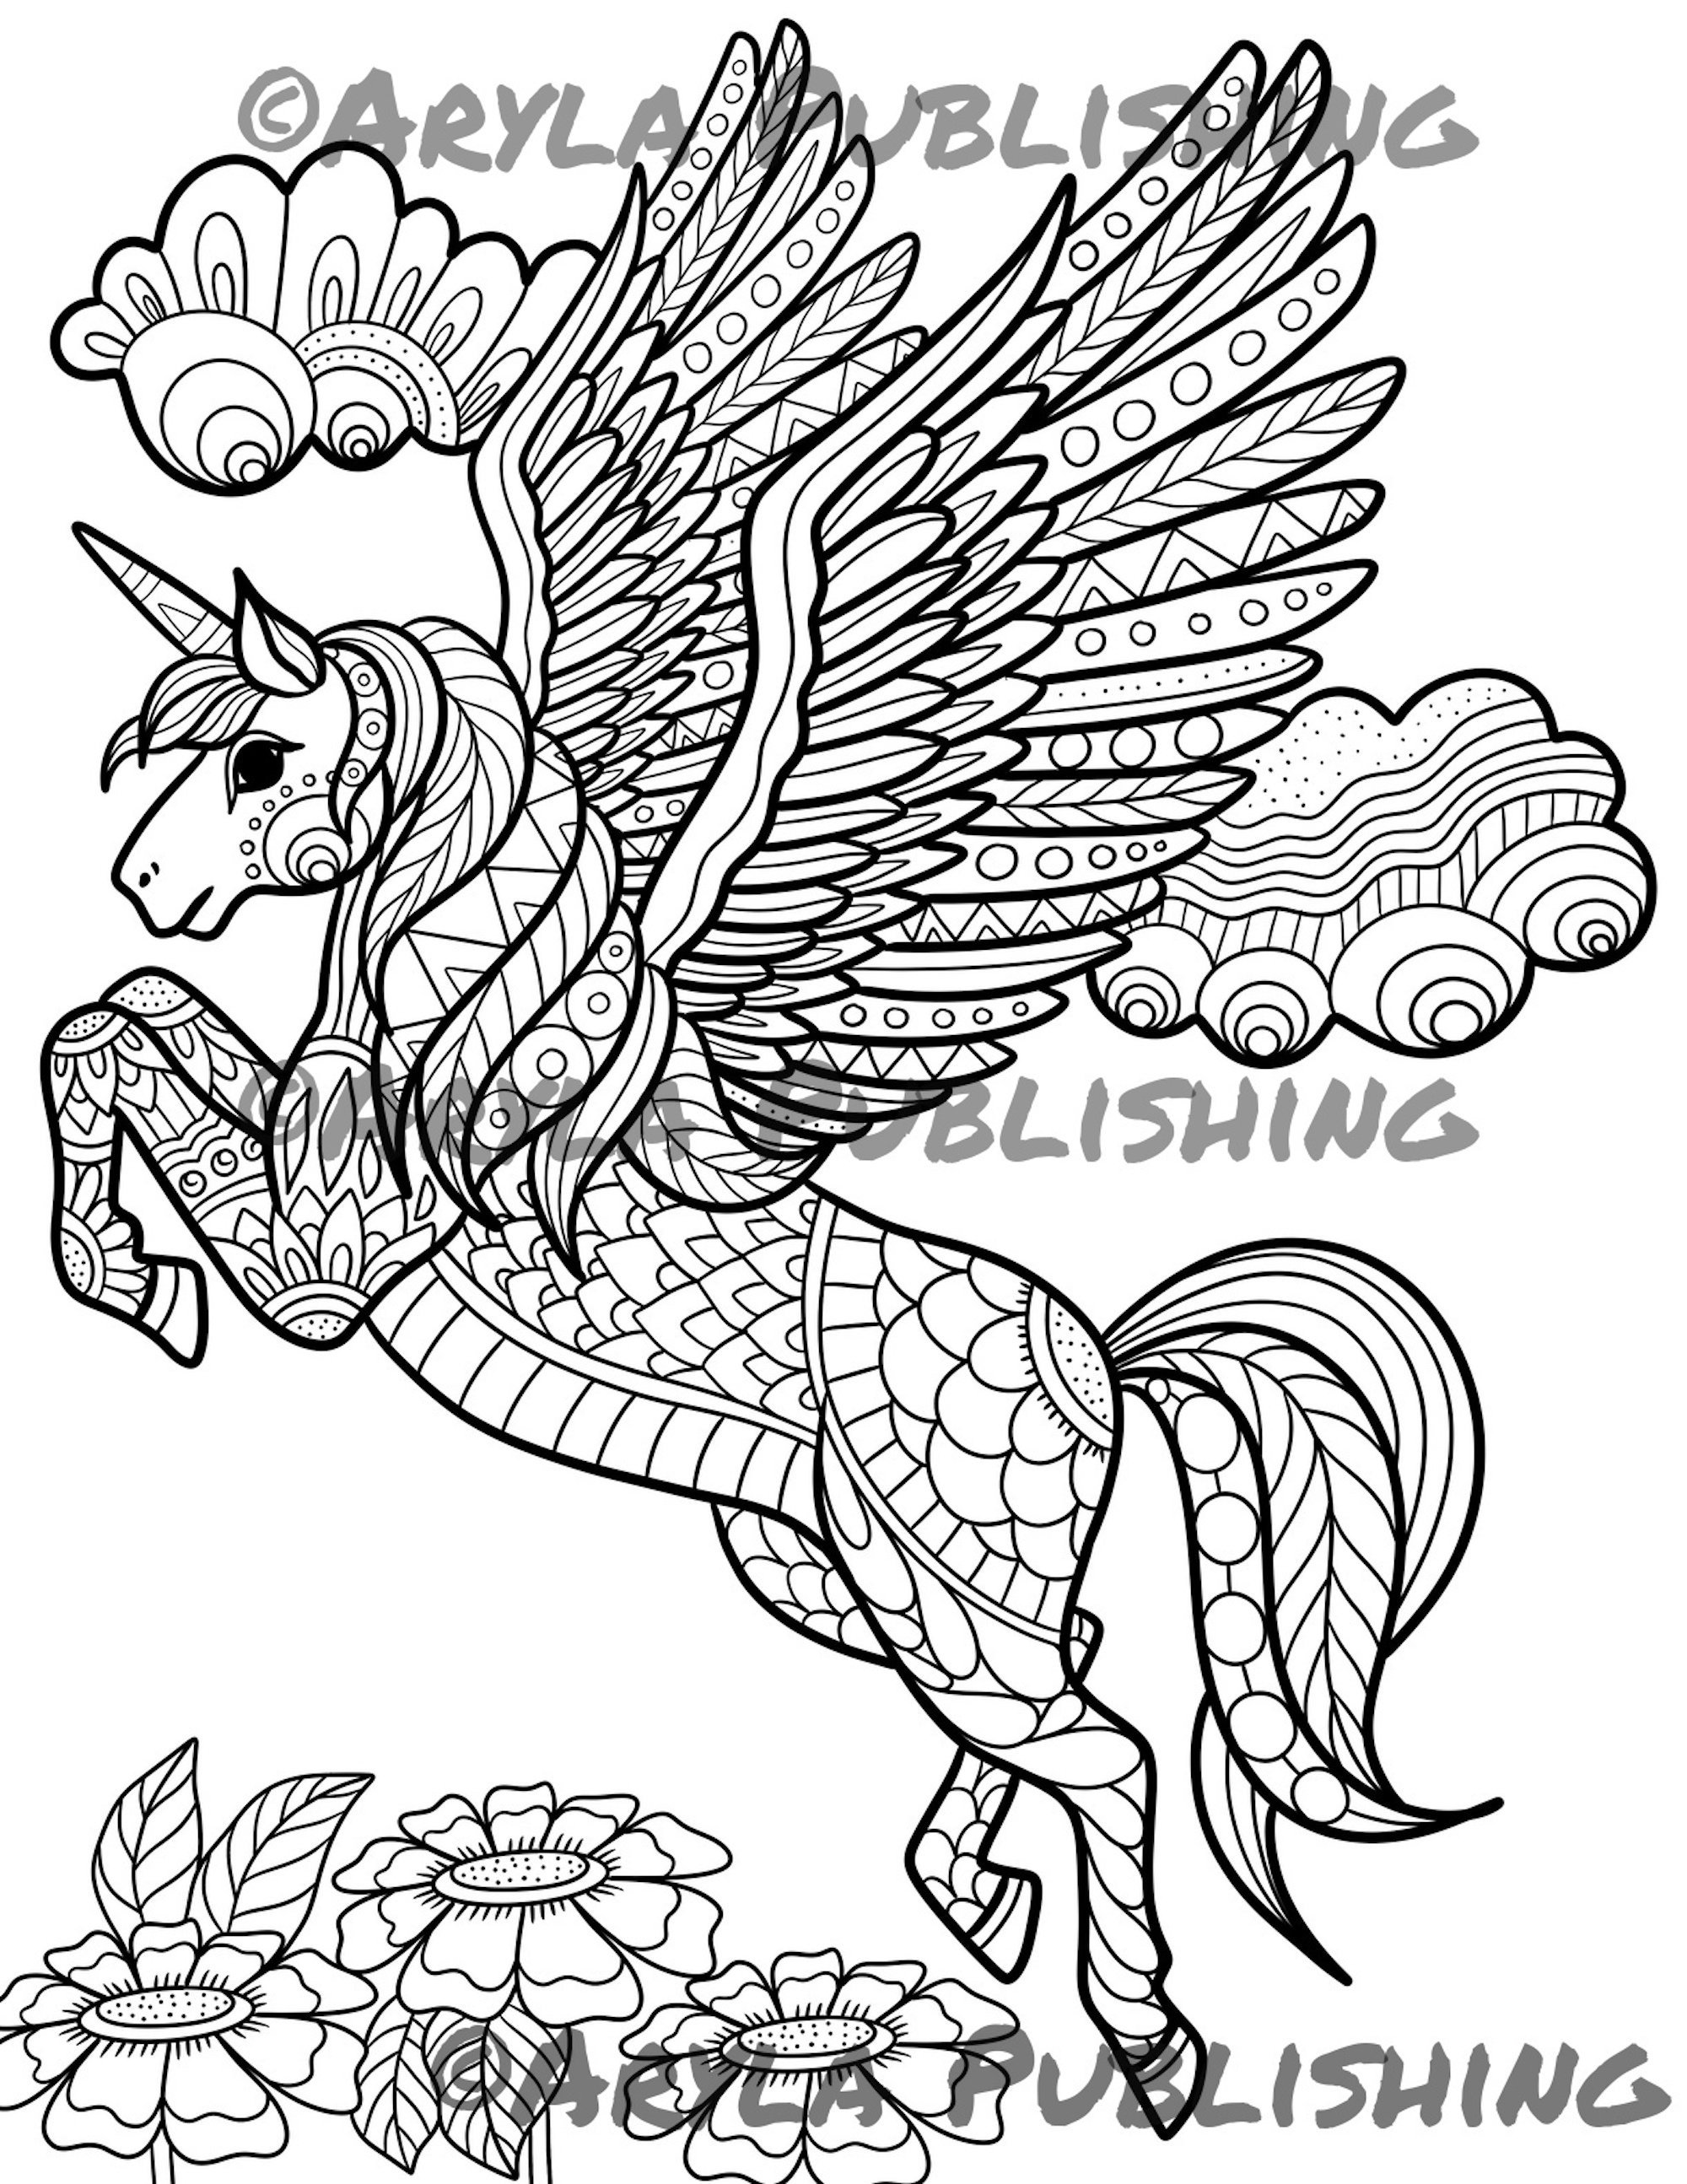 Flying unicorn mythical creature coloring page printable colouring page adult color sheet instant download instant download